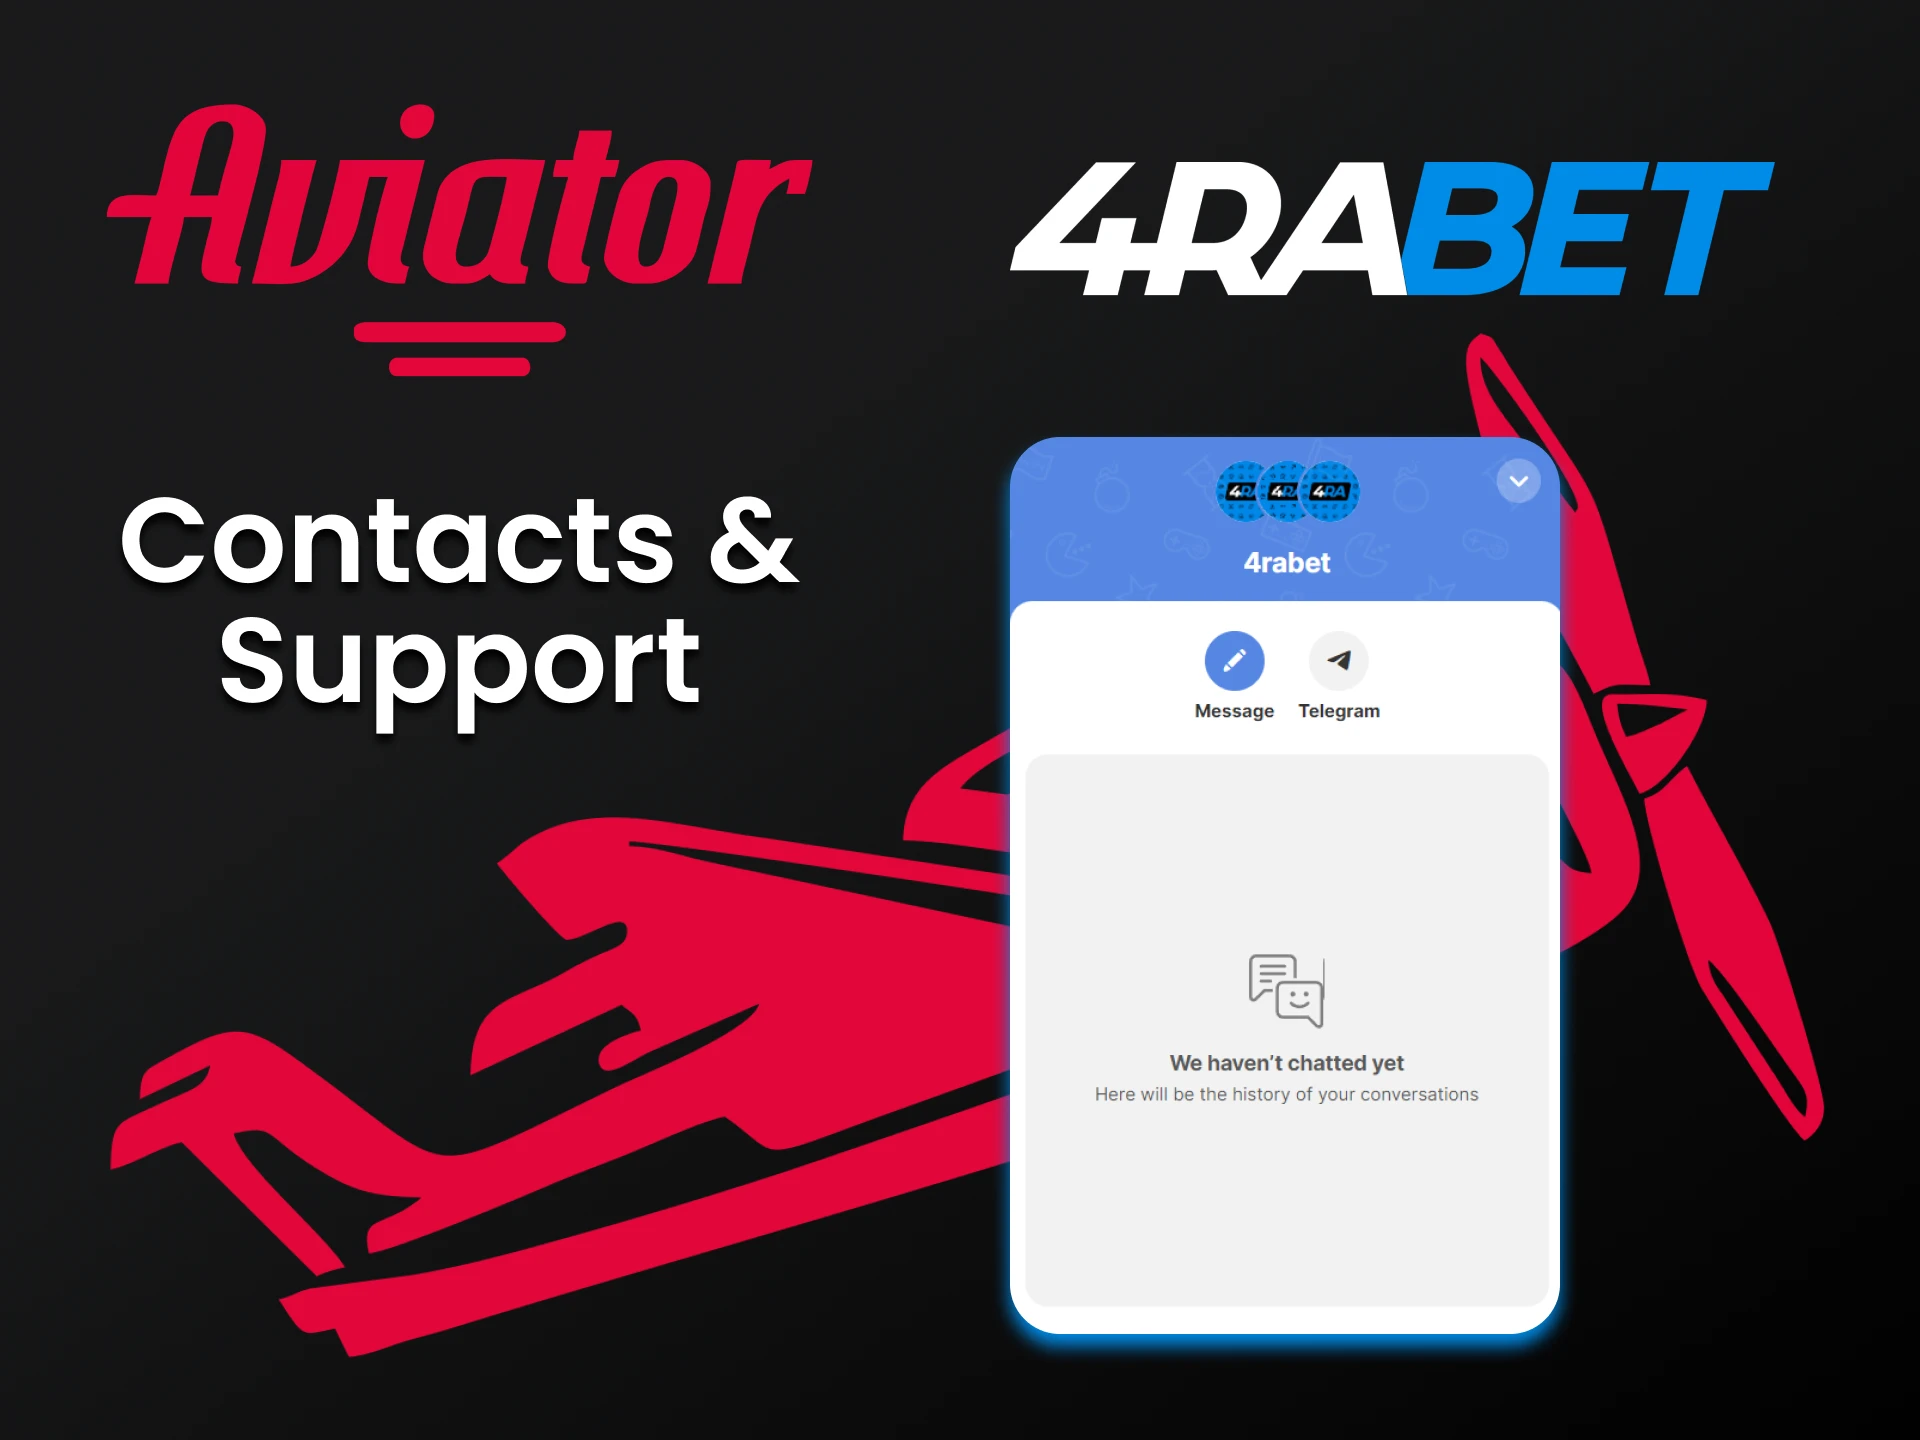 If you have any questions, you can contact 4rabet support.